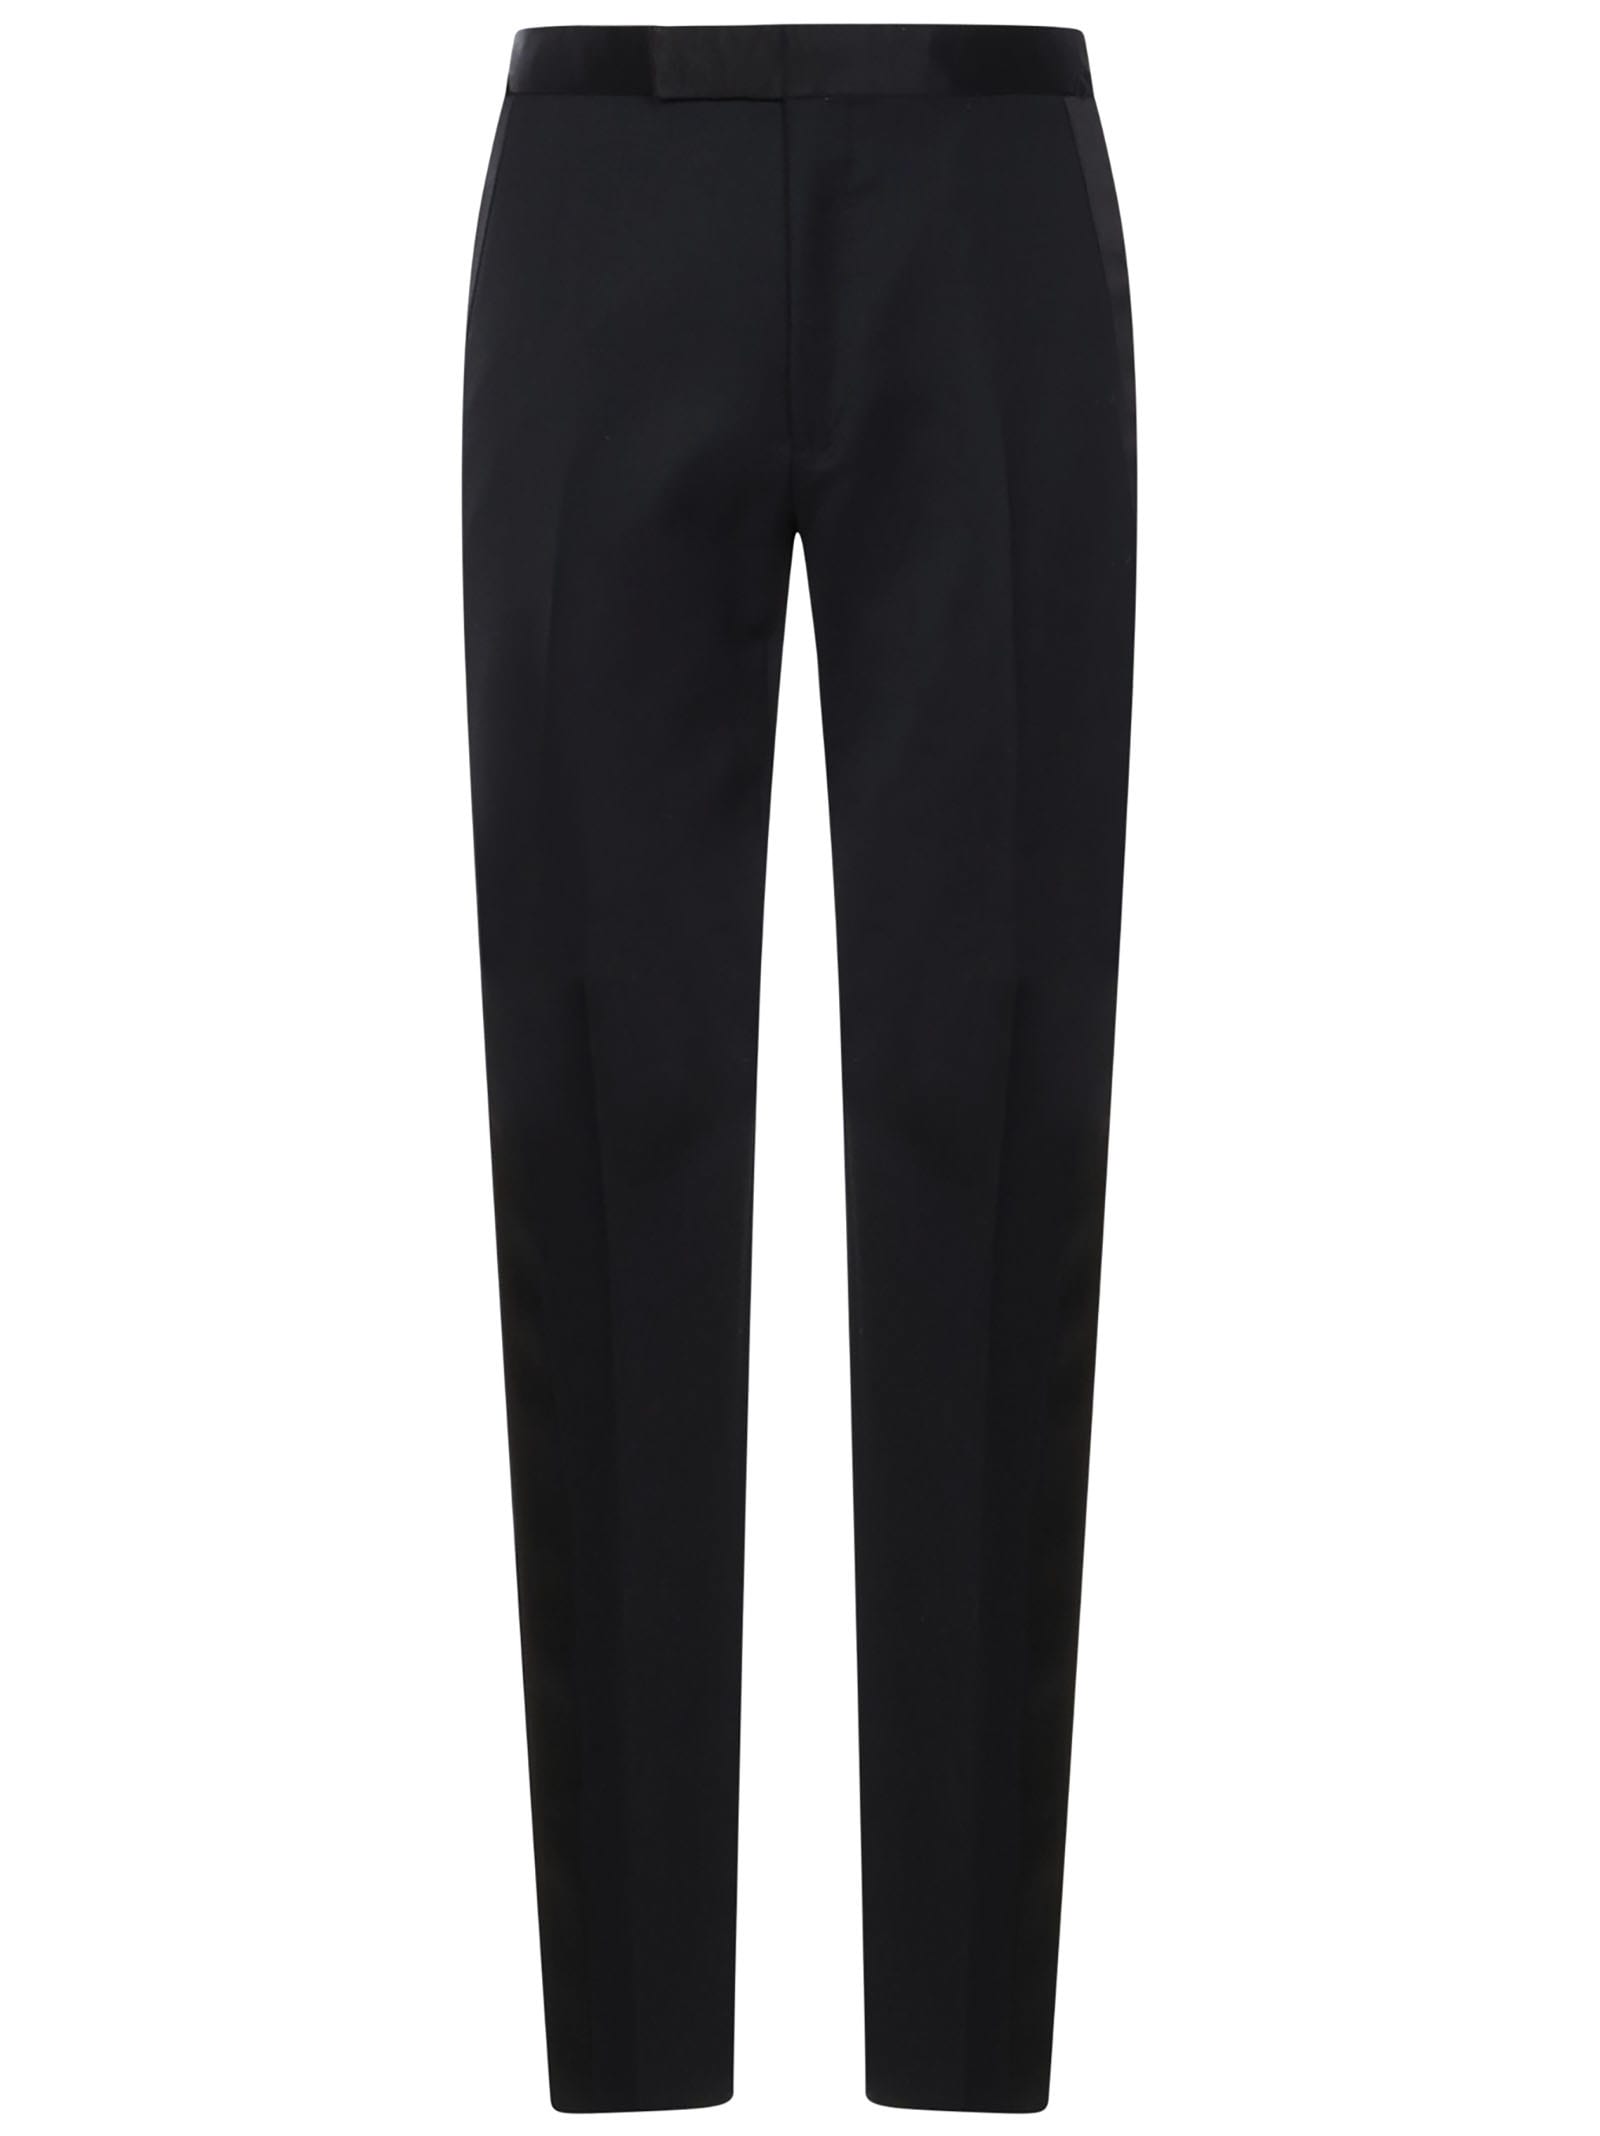 Tom Ford Trousers | Smart Closet